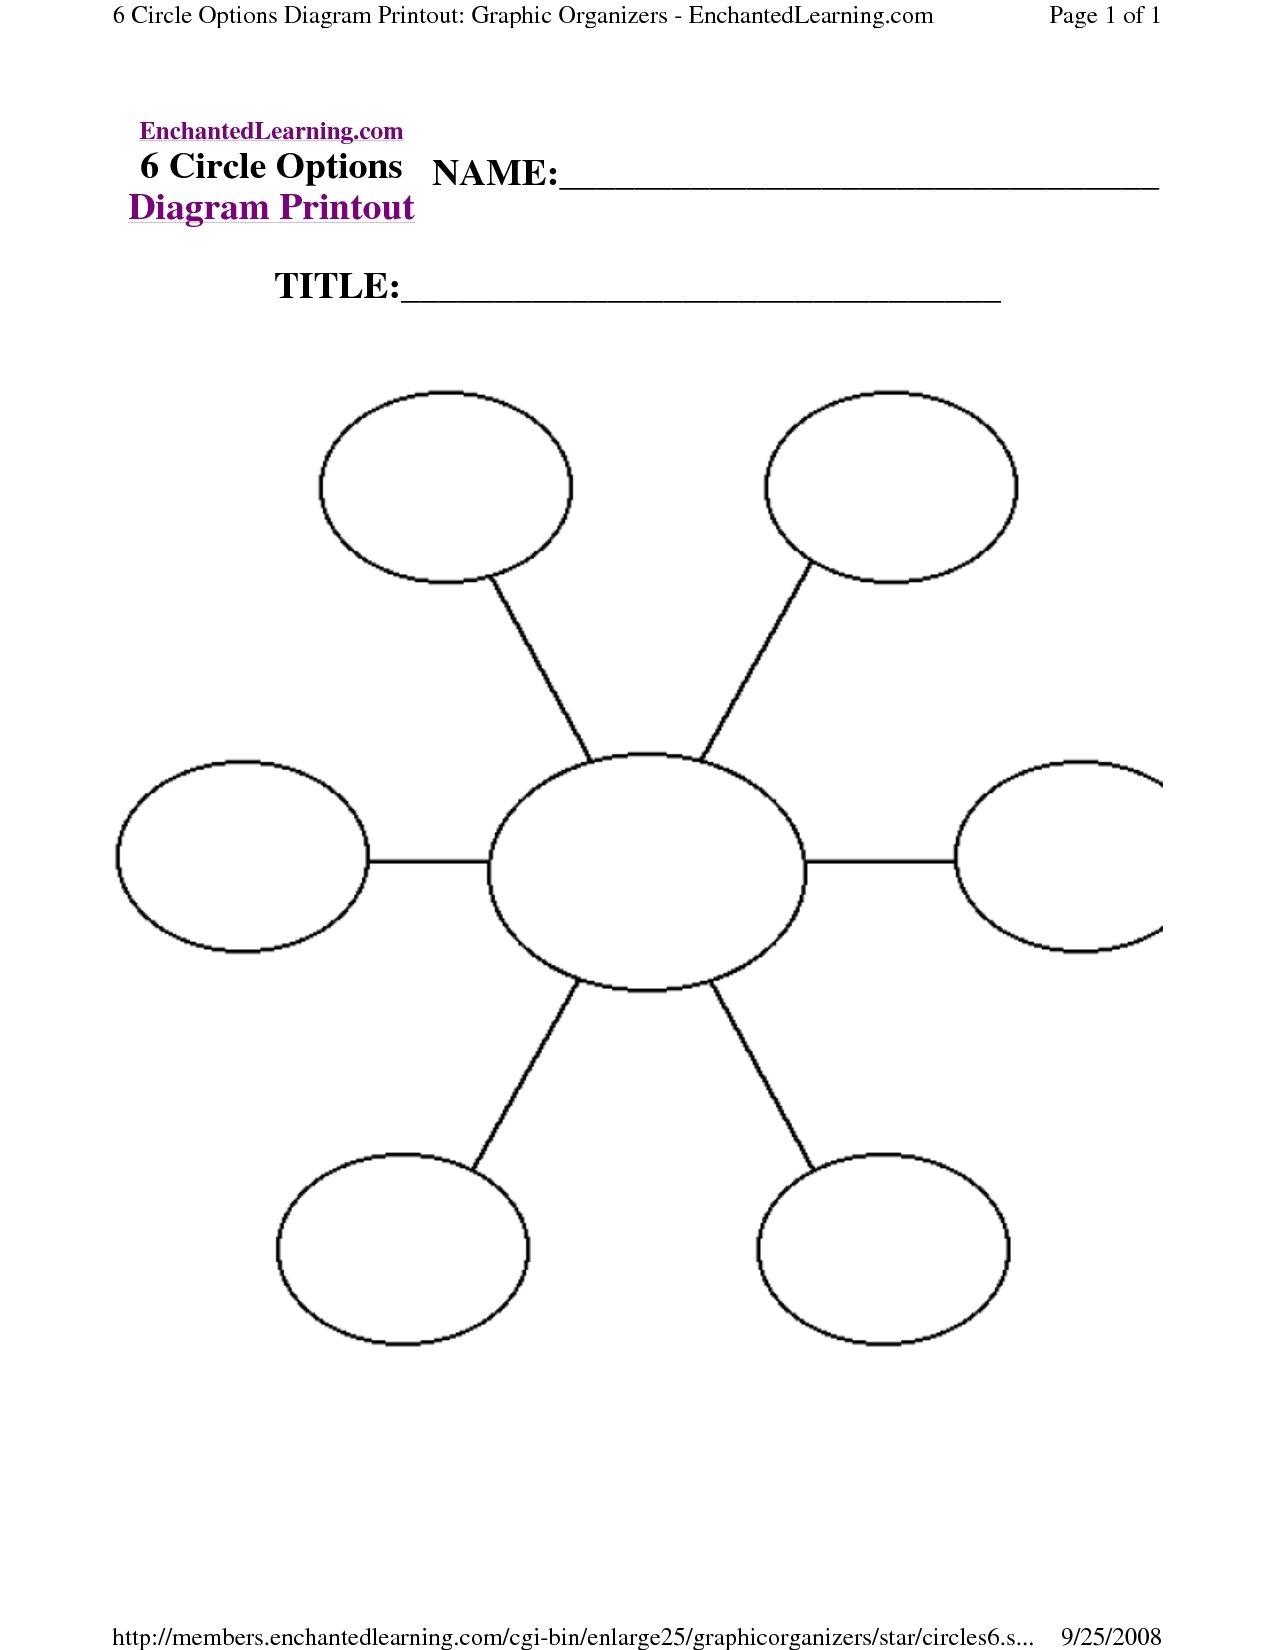 12-blank-graphic-organizers-images-printable-web-graphic-organizer-blank-graphic-organizer